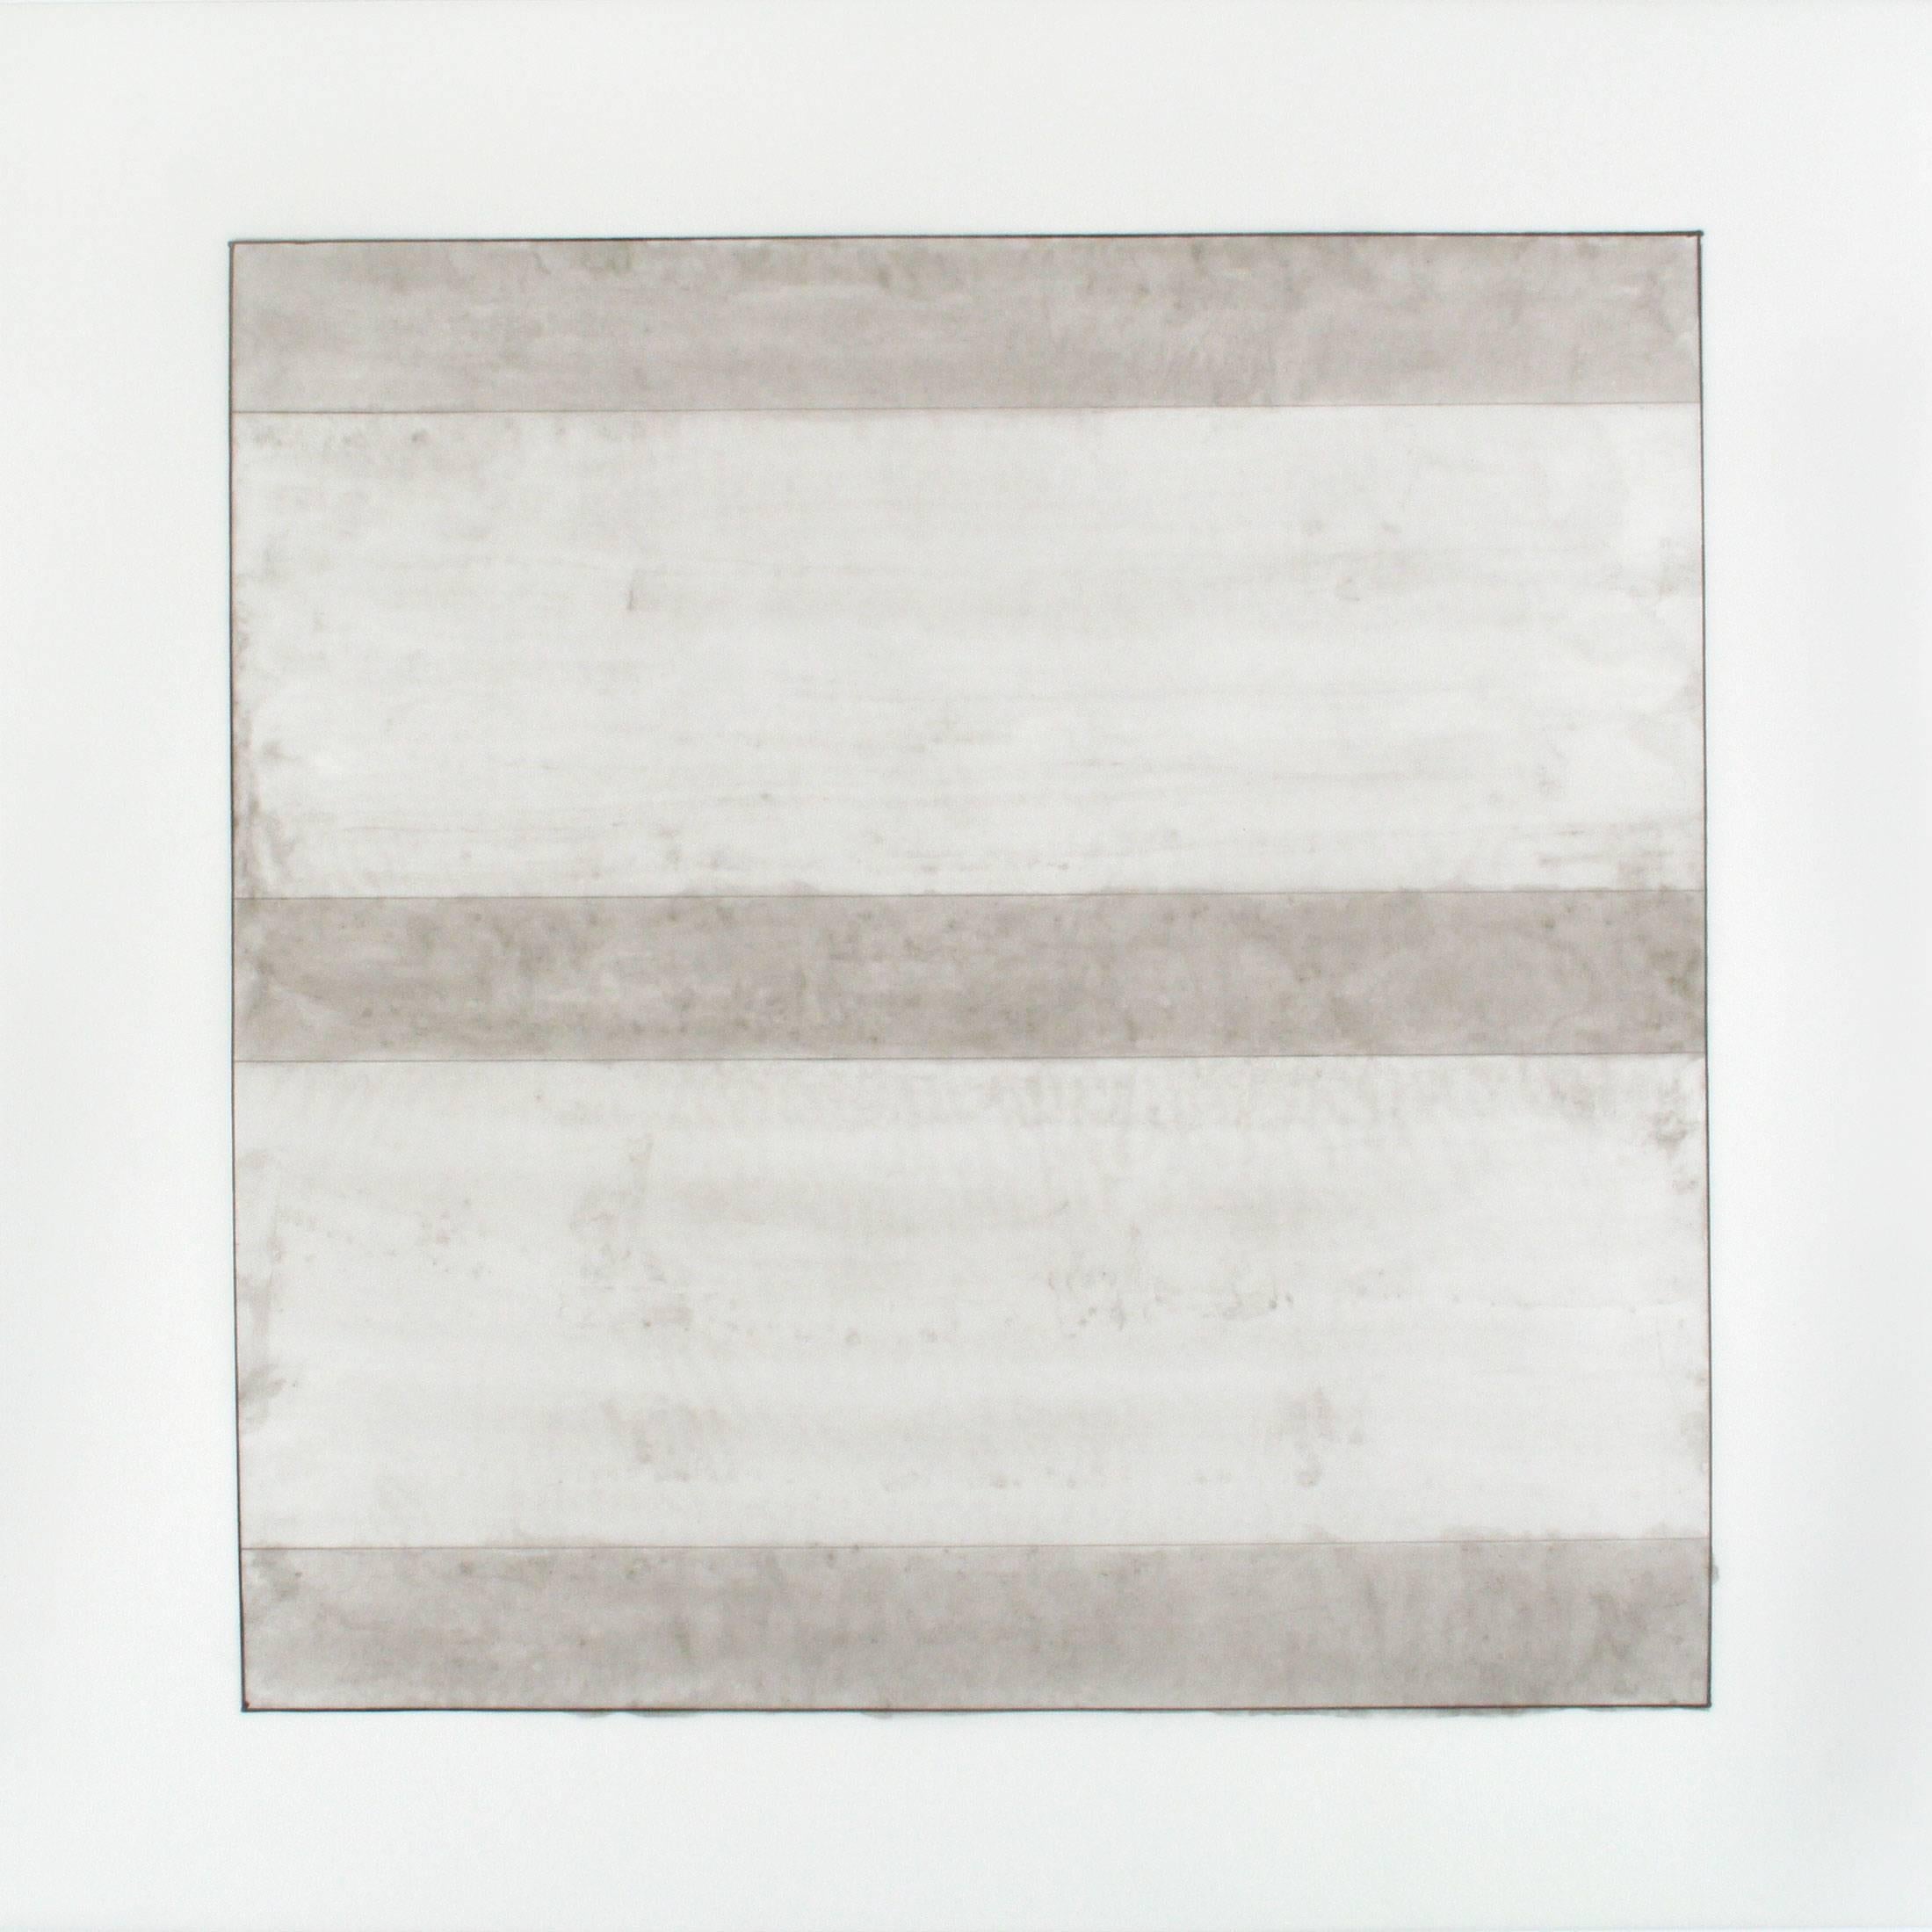 AGNES MARTIN. Paintings and Drawings 1974-1990 1